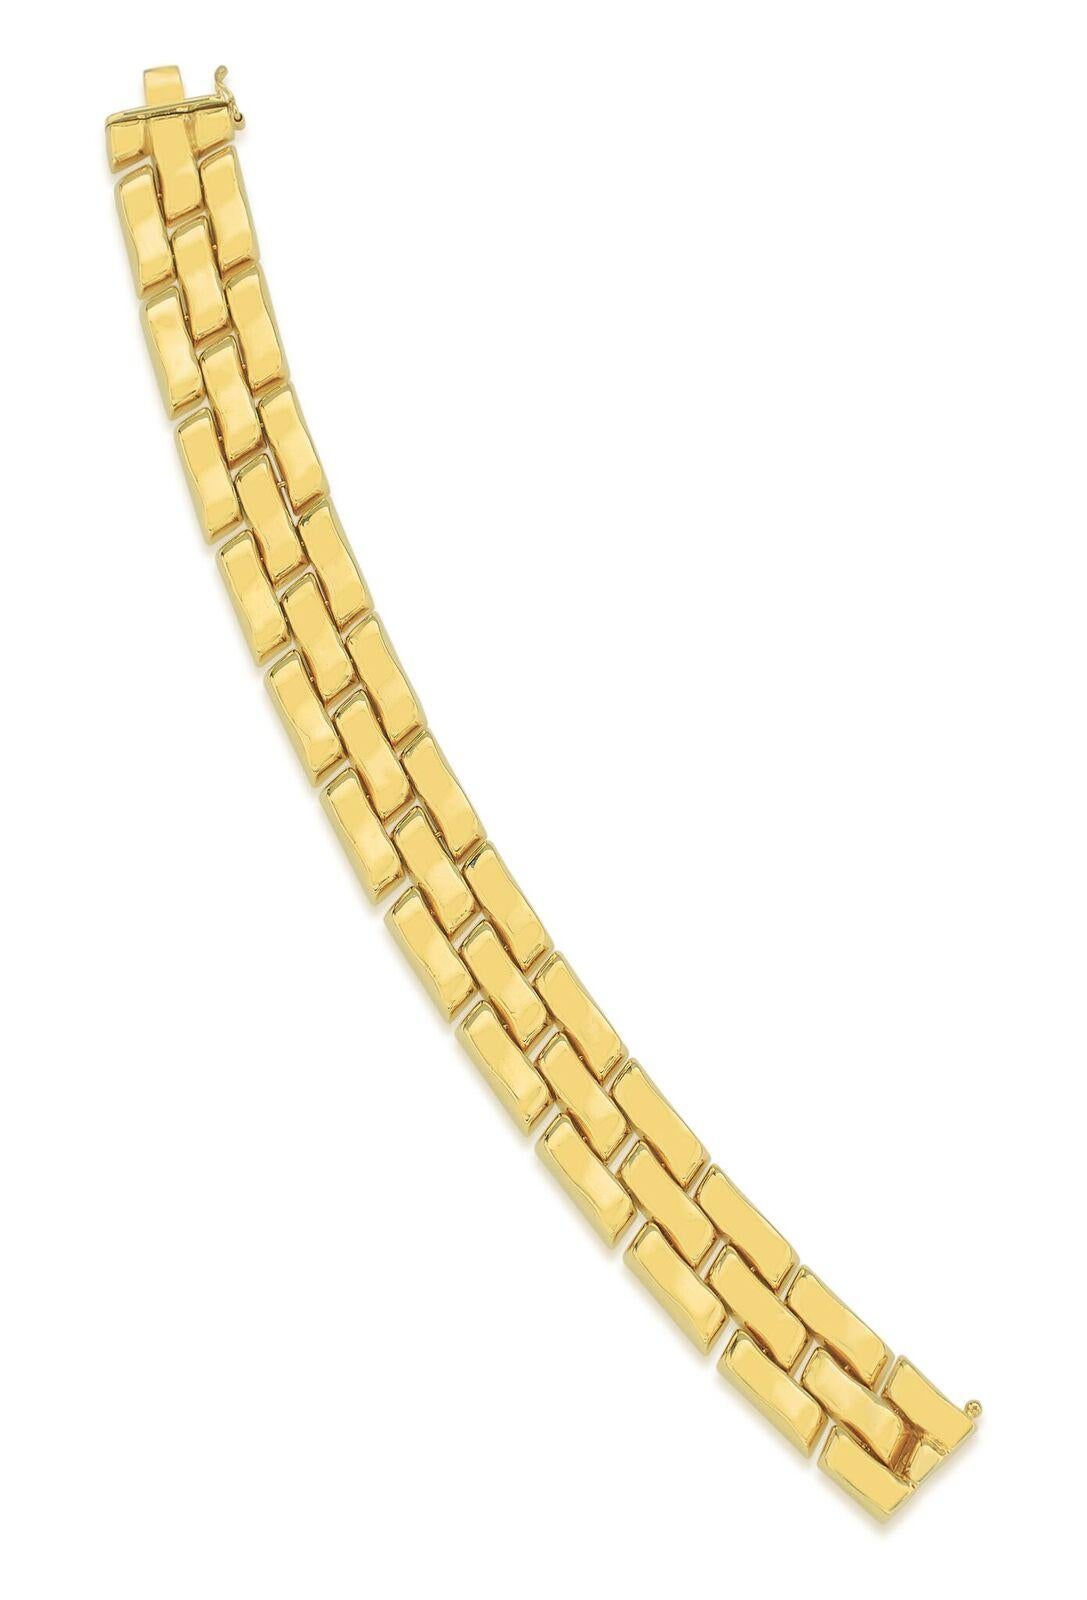 This 14K yellow gold bracelet encompasses the essence of Italian Gold and craftsmanship. This polished three link bracelet is ideal for layering and stacking and is a classic look you'll want to wear every day!